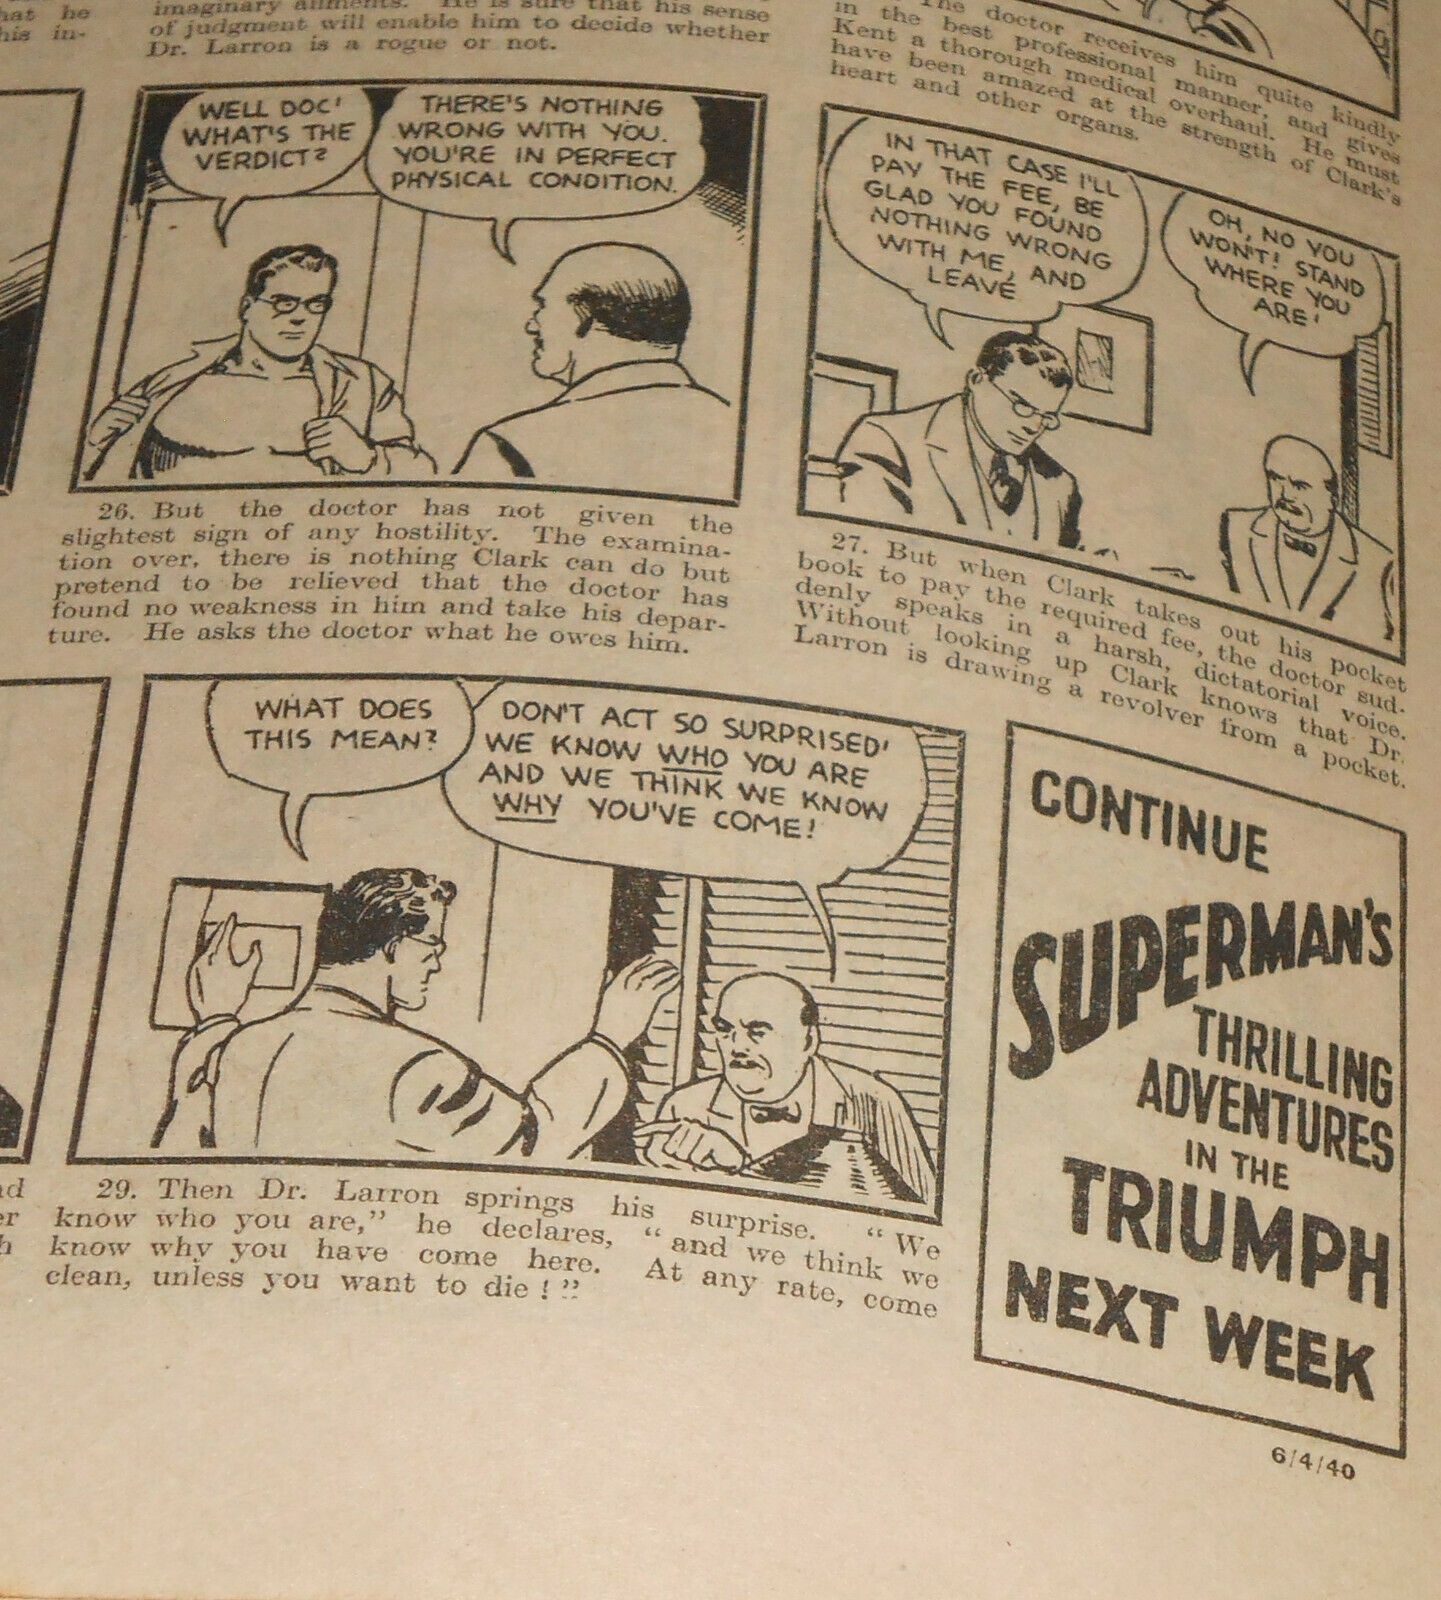 Superman in Triumph and The Gem No. 807, cover dated 6th April 1940